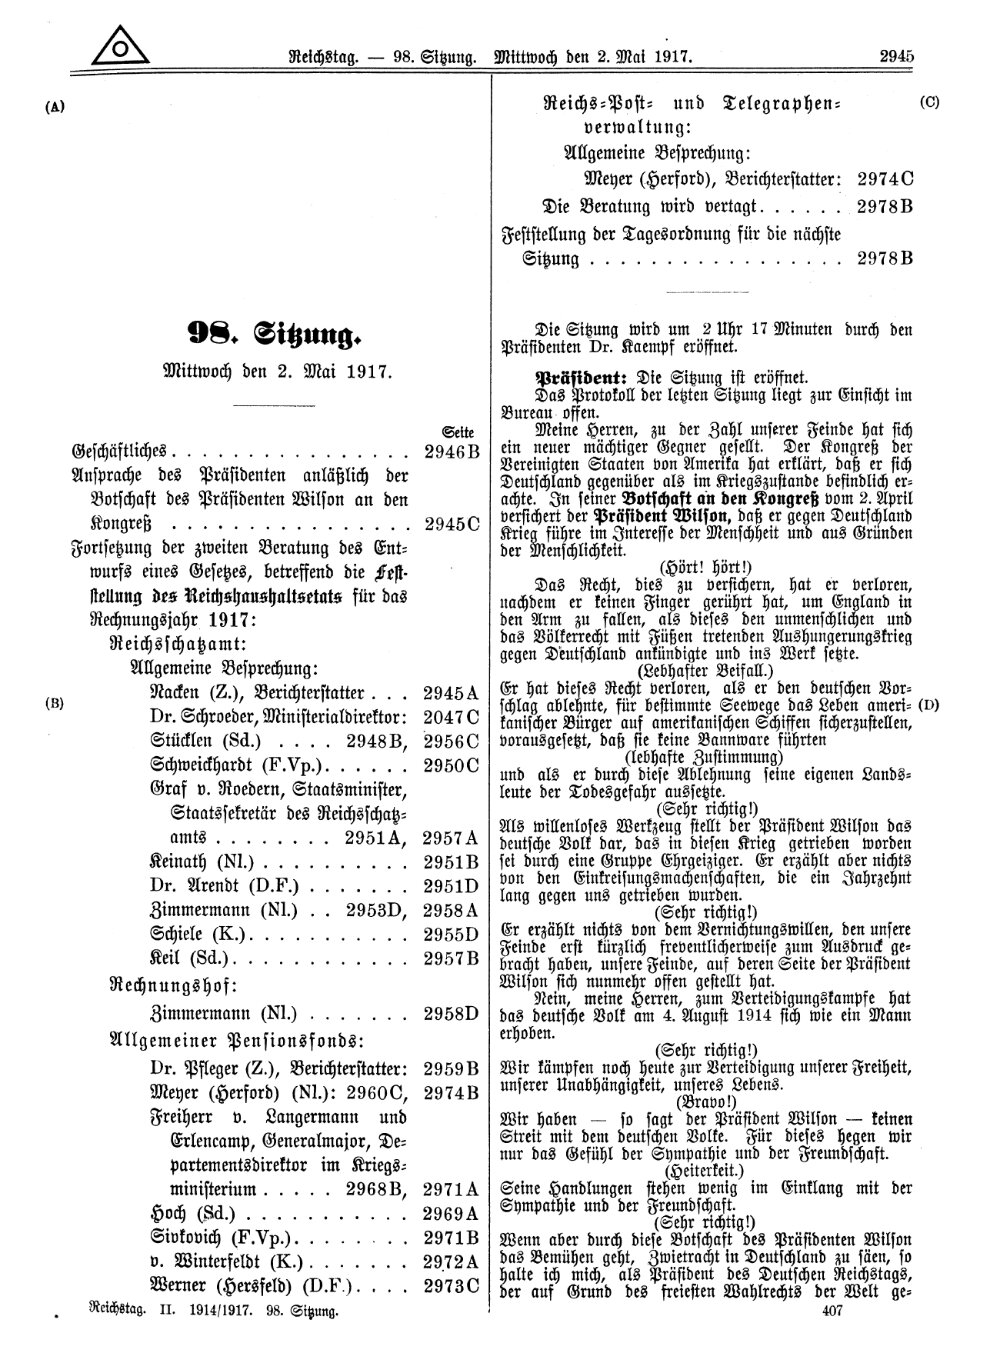 Scan of page 2945